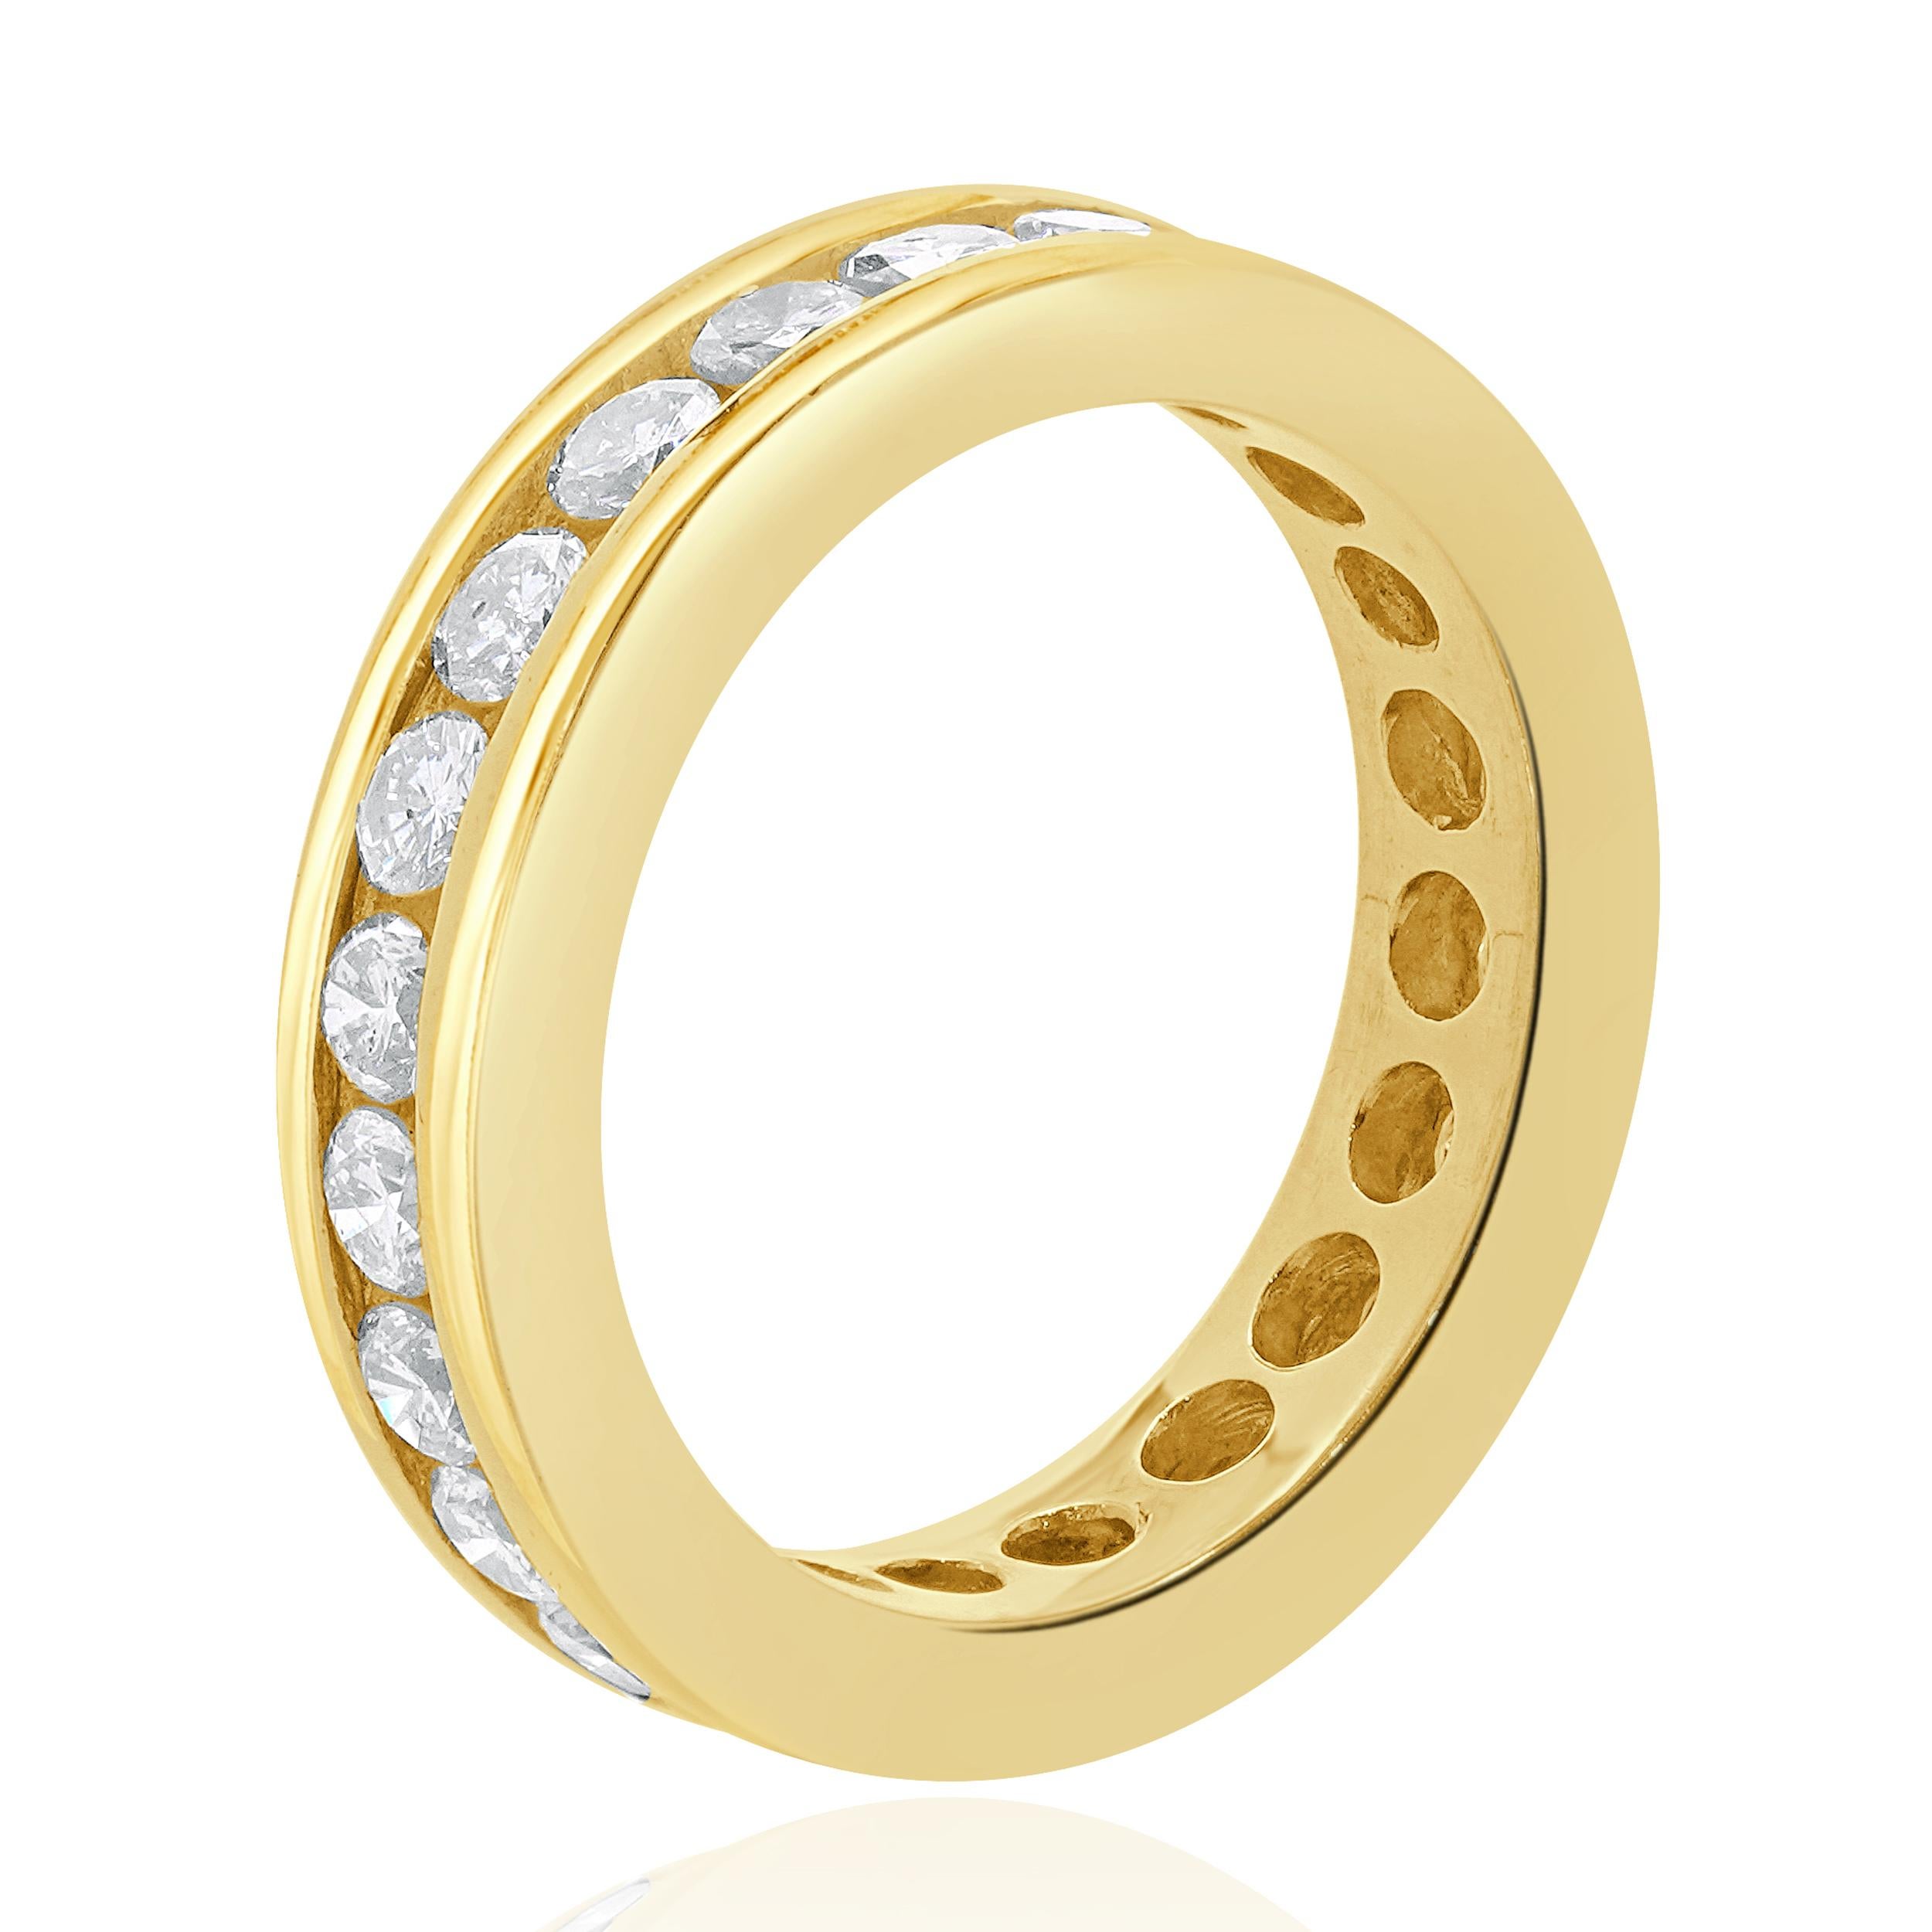 Designer: Custom
Material: 14K yellow gold
Diamonds: 24 round brilliant cut = 1.44cttw
Color: I / J
Clarity: I2-3
Size: 7.75 sizing available 
Dimensions: ring top measures 4.7mm in width
Weight: 6.03 grams
